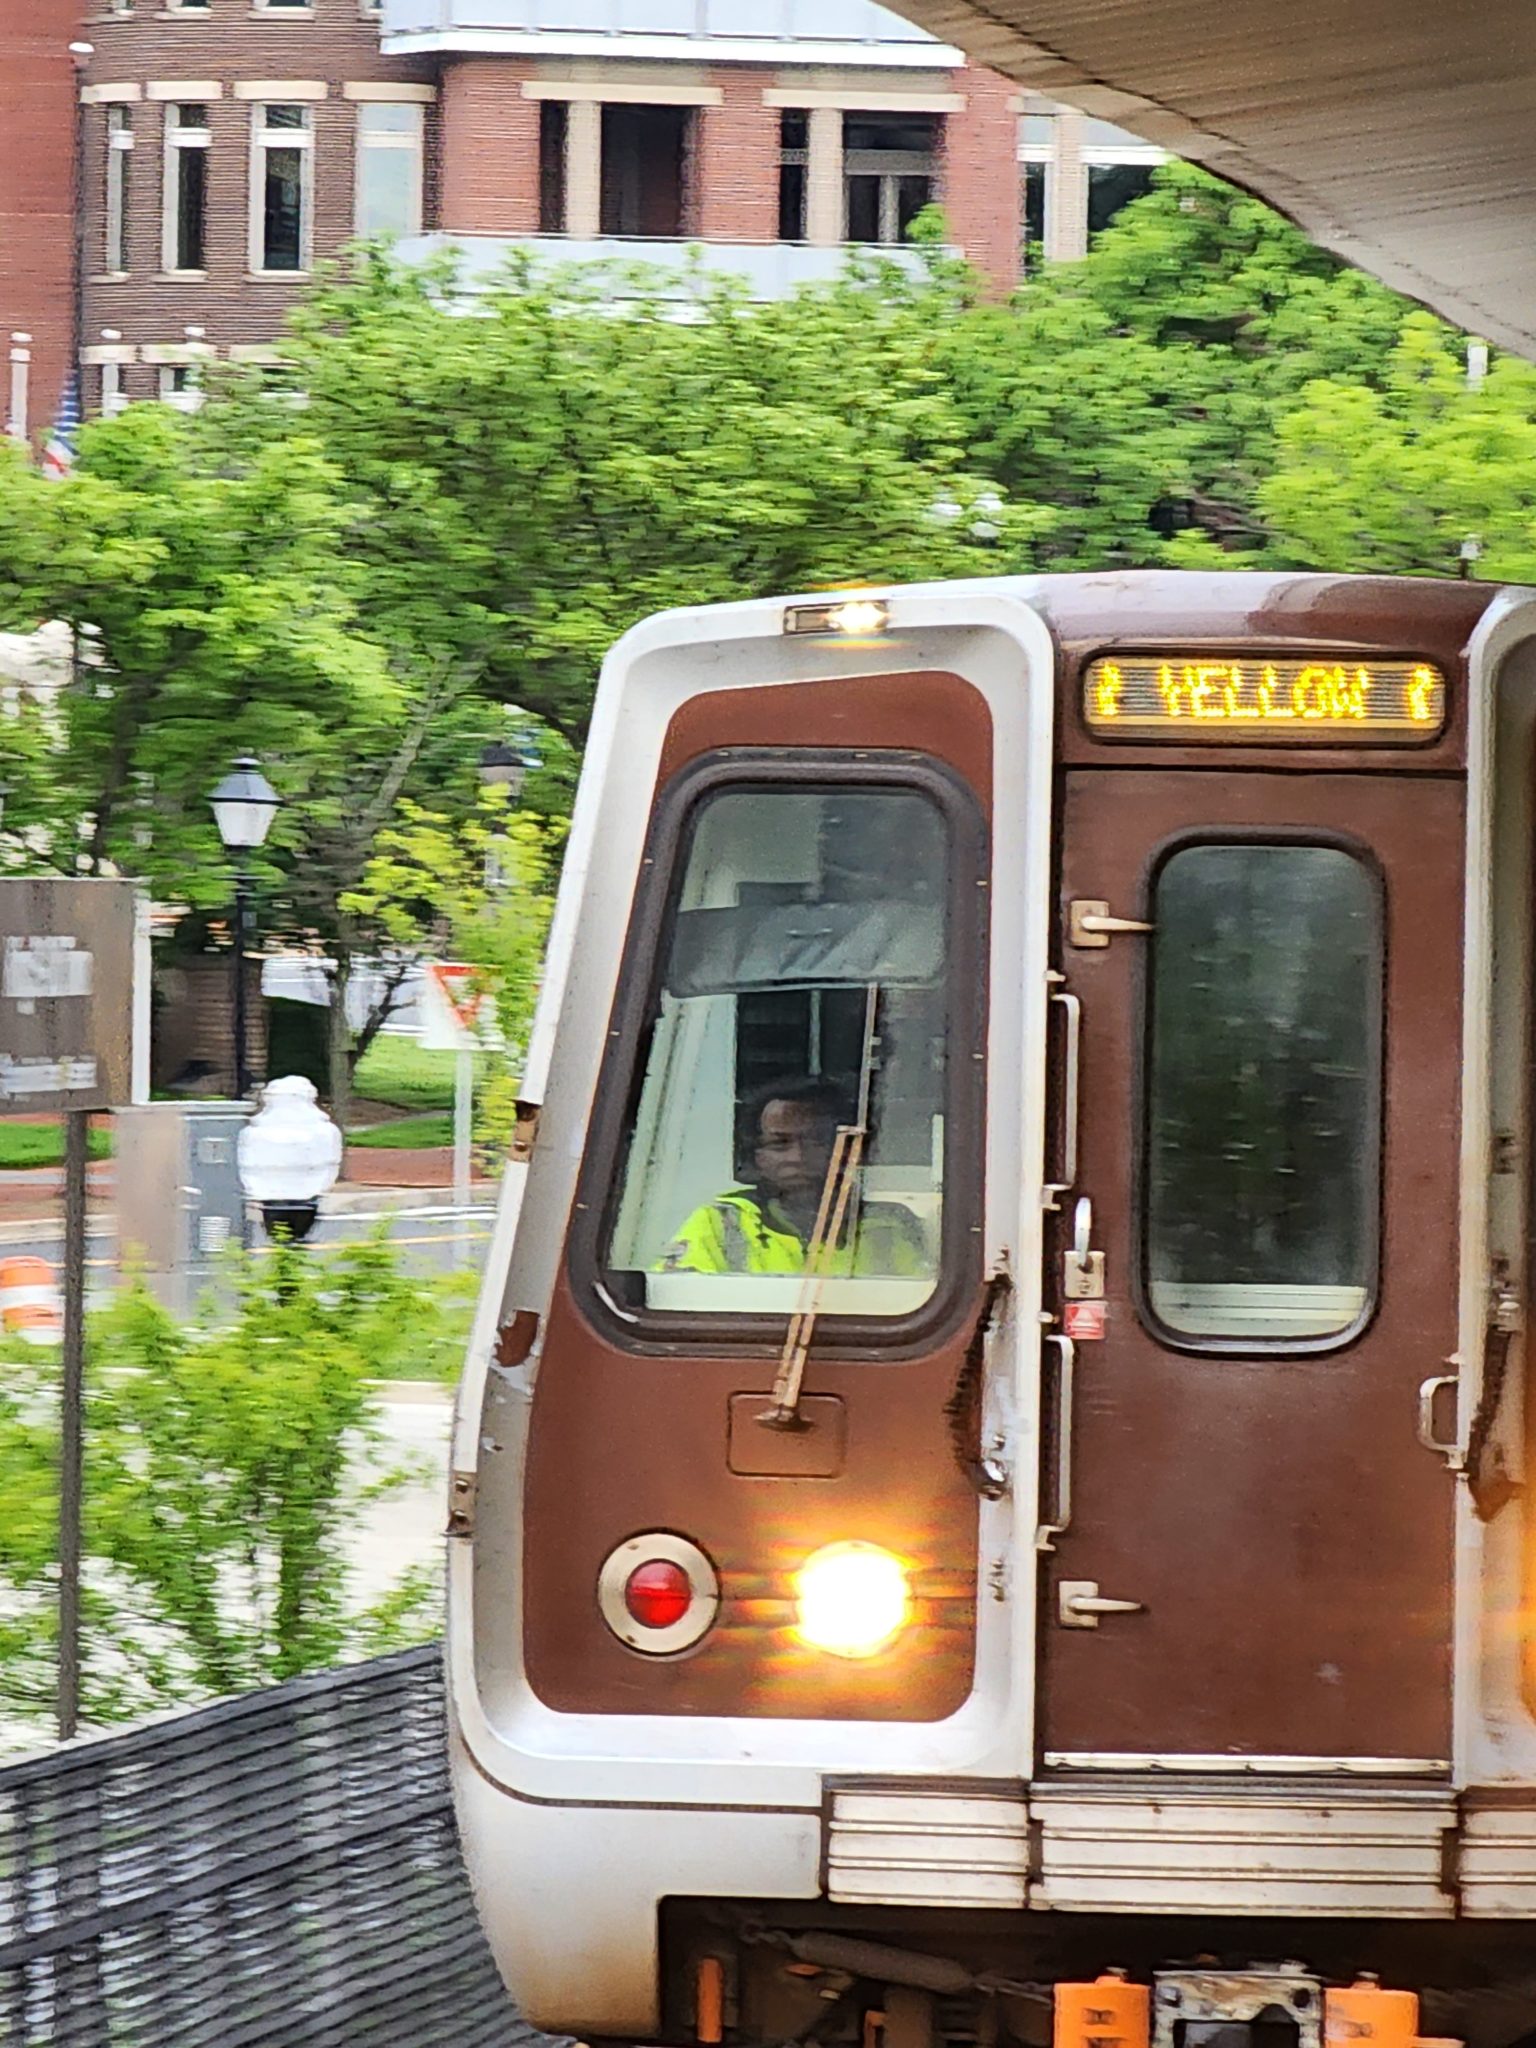 Metro car on tracks that says Yellow on front.